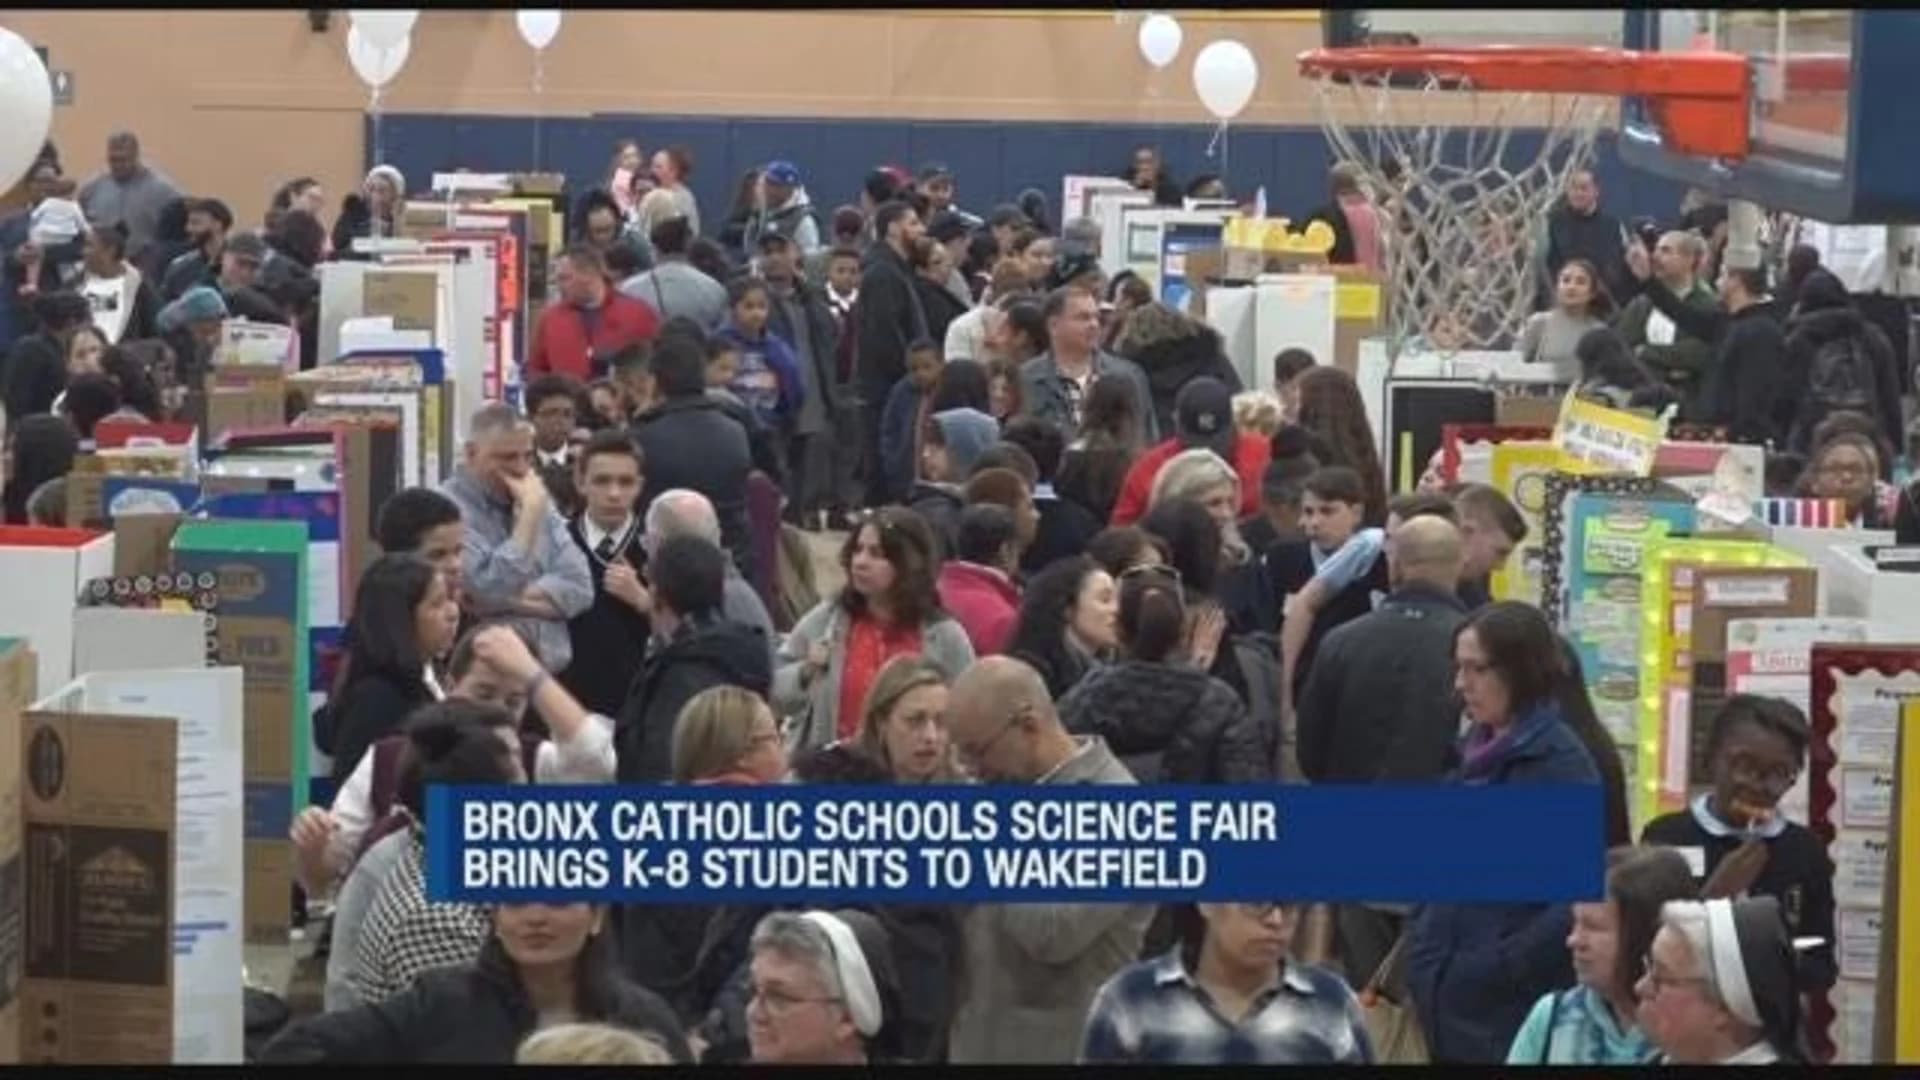 Bronx Catholic Schools Science Fair hosts projects from the borough's brightest